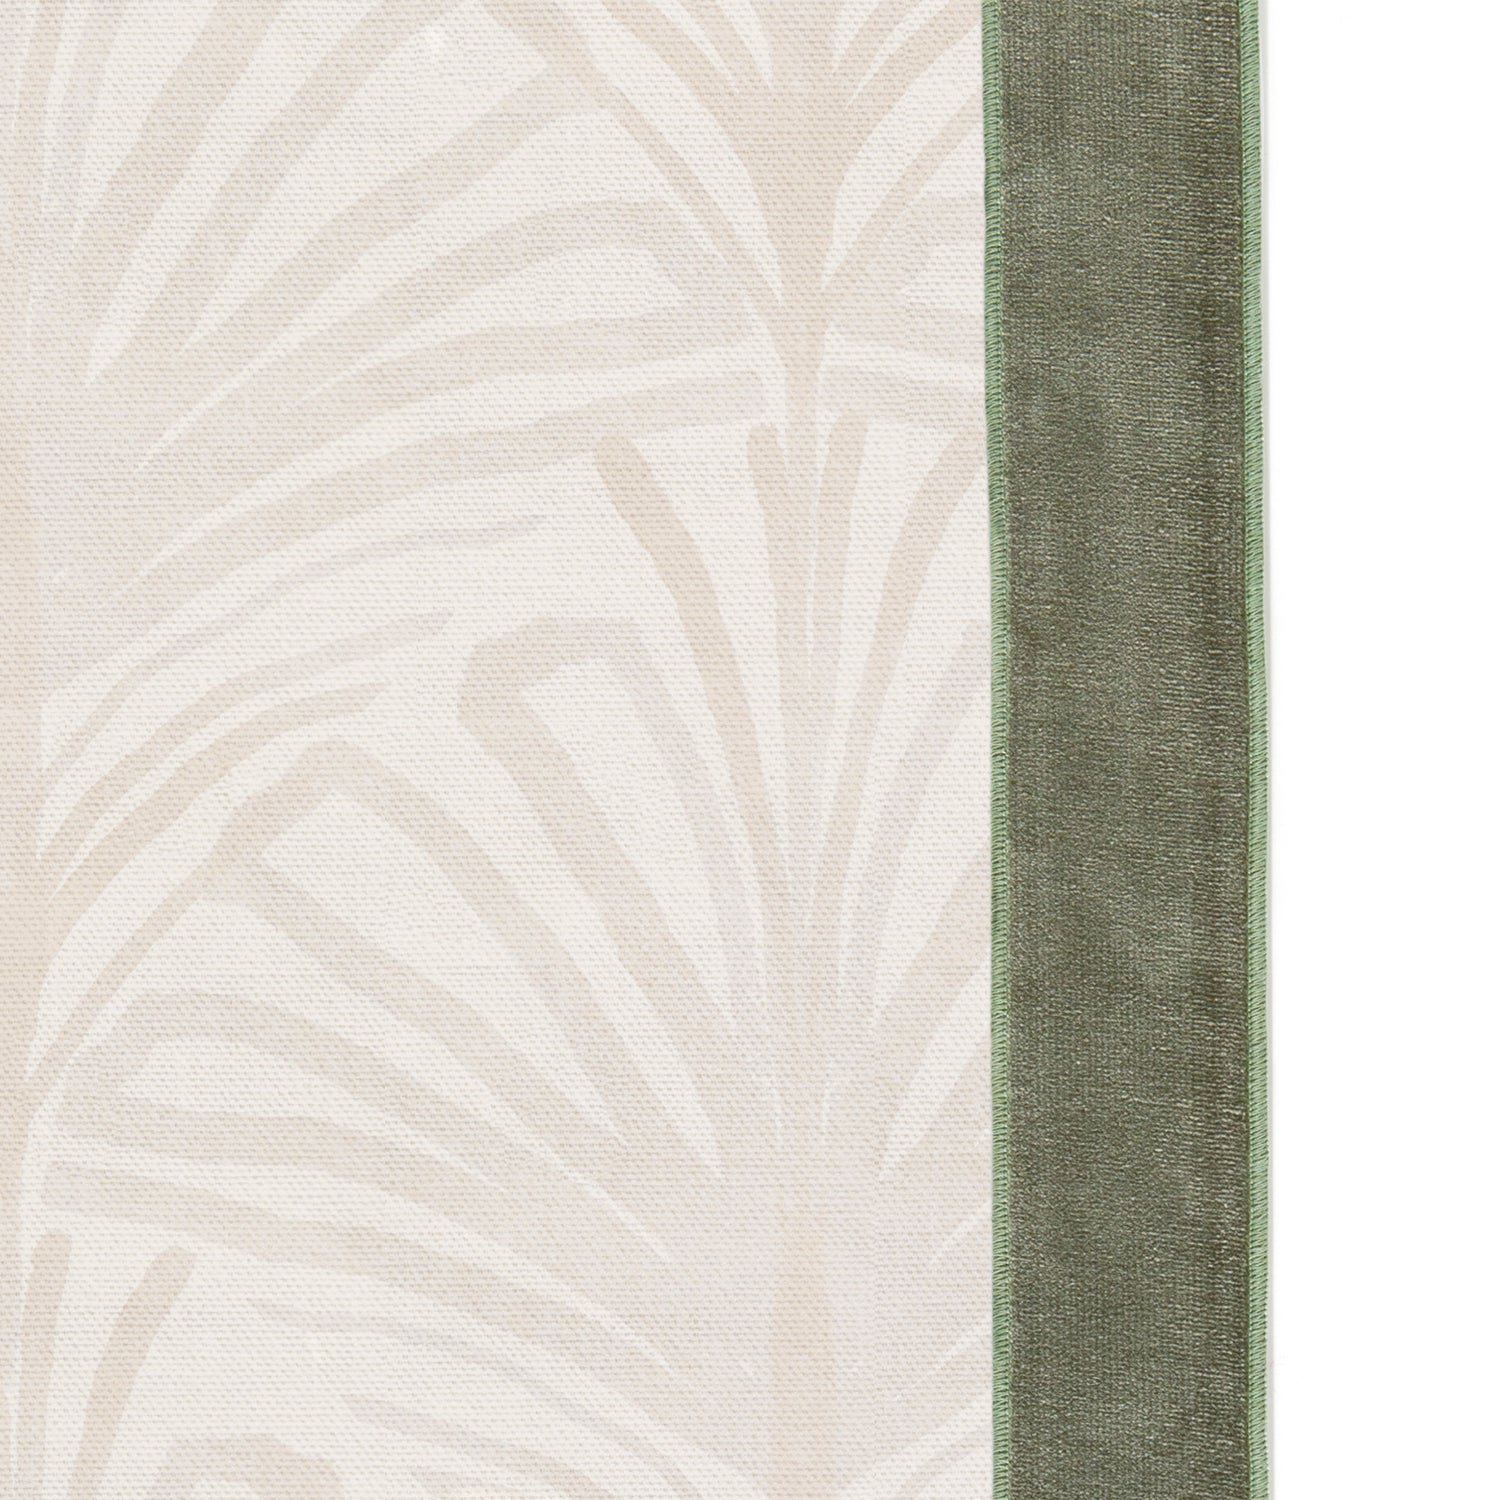 Upclose picture of Suzy Sand custom Beige Palmcurtain with fern velvet band trim